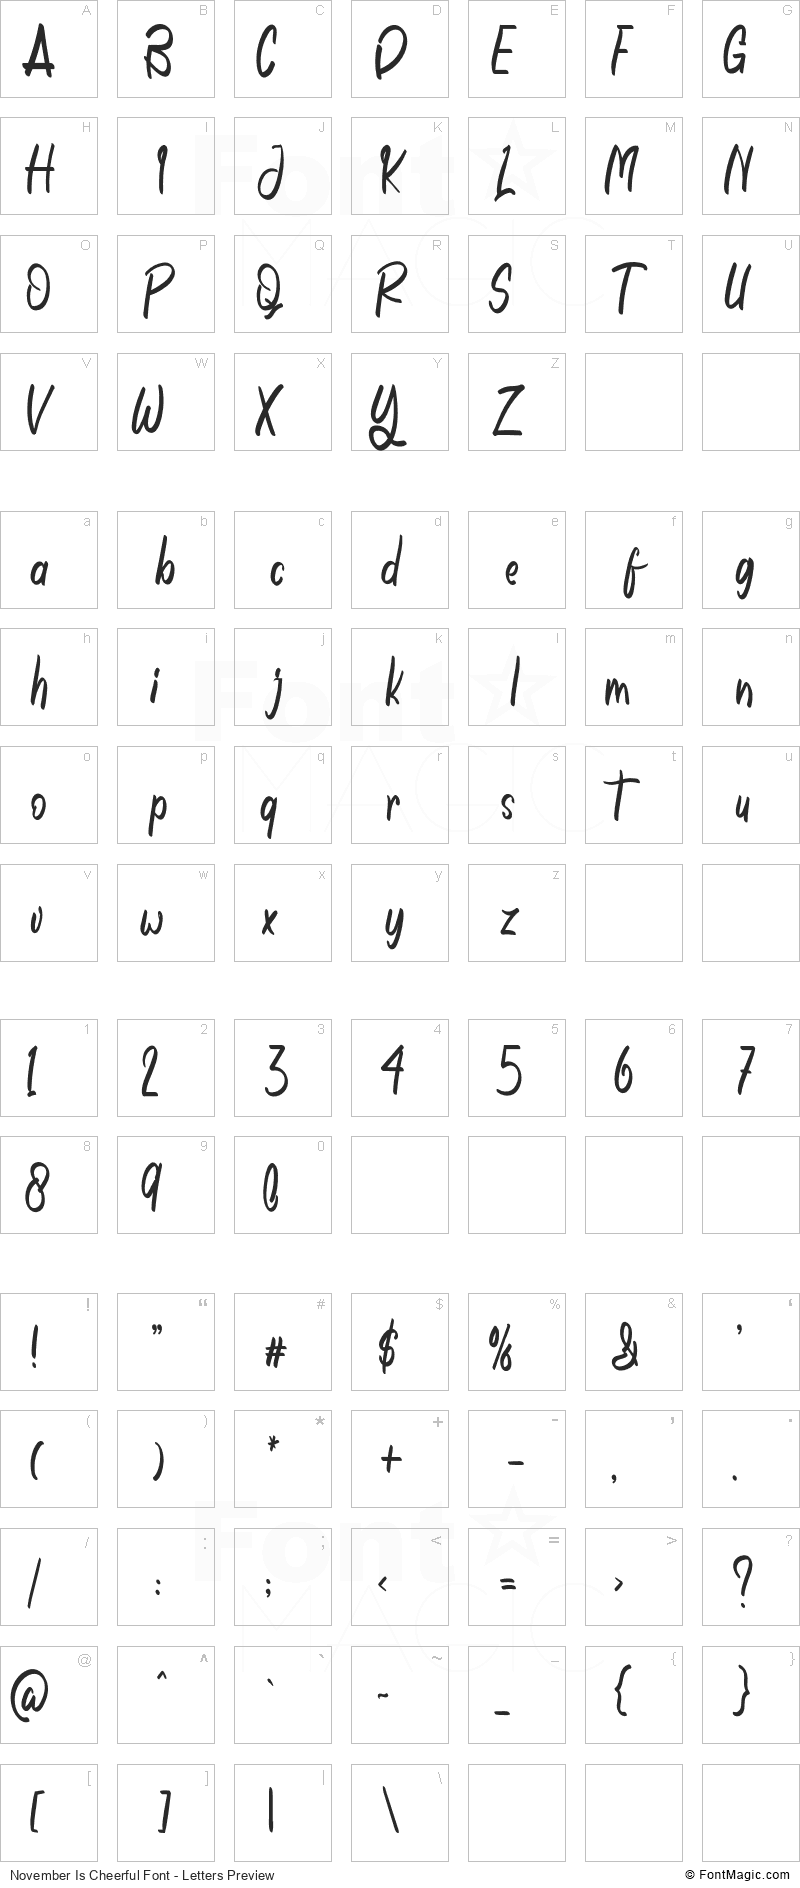 November Is Cheerful Font - All Latters Preview Chart